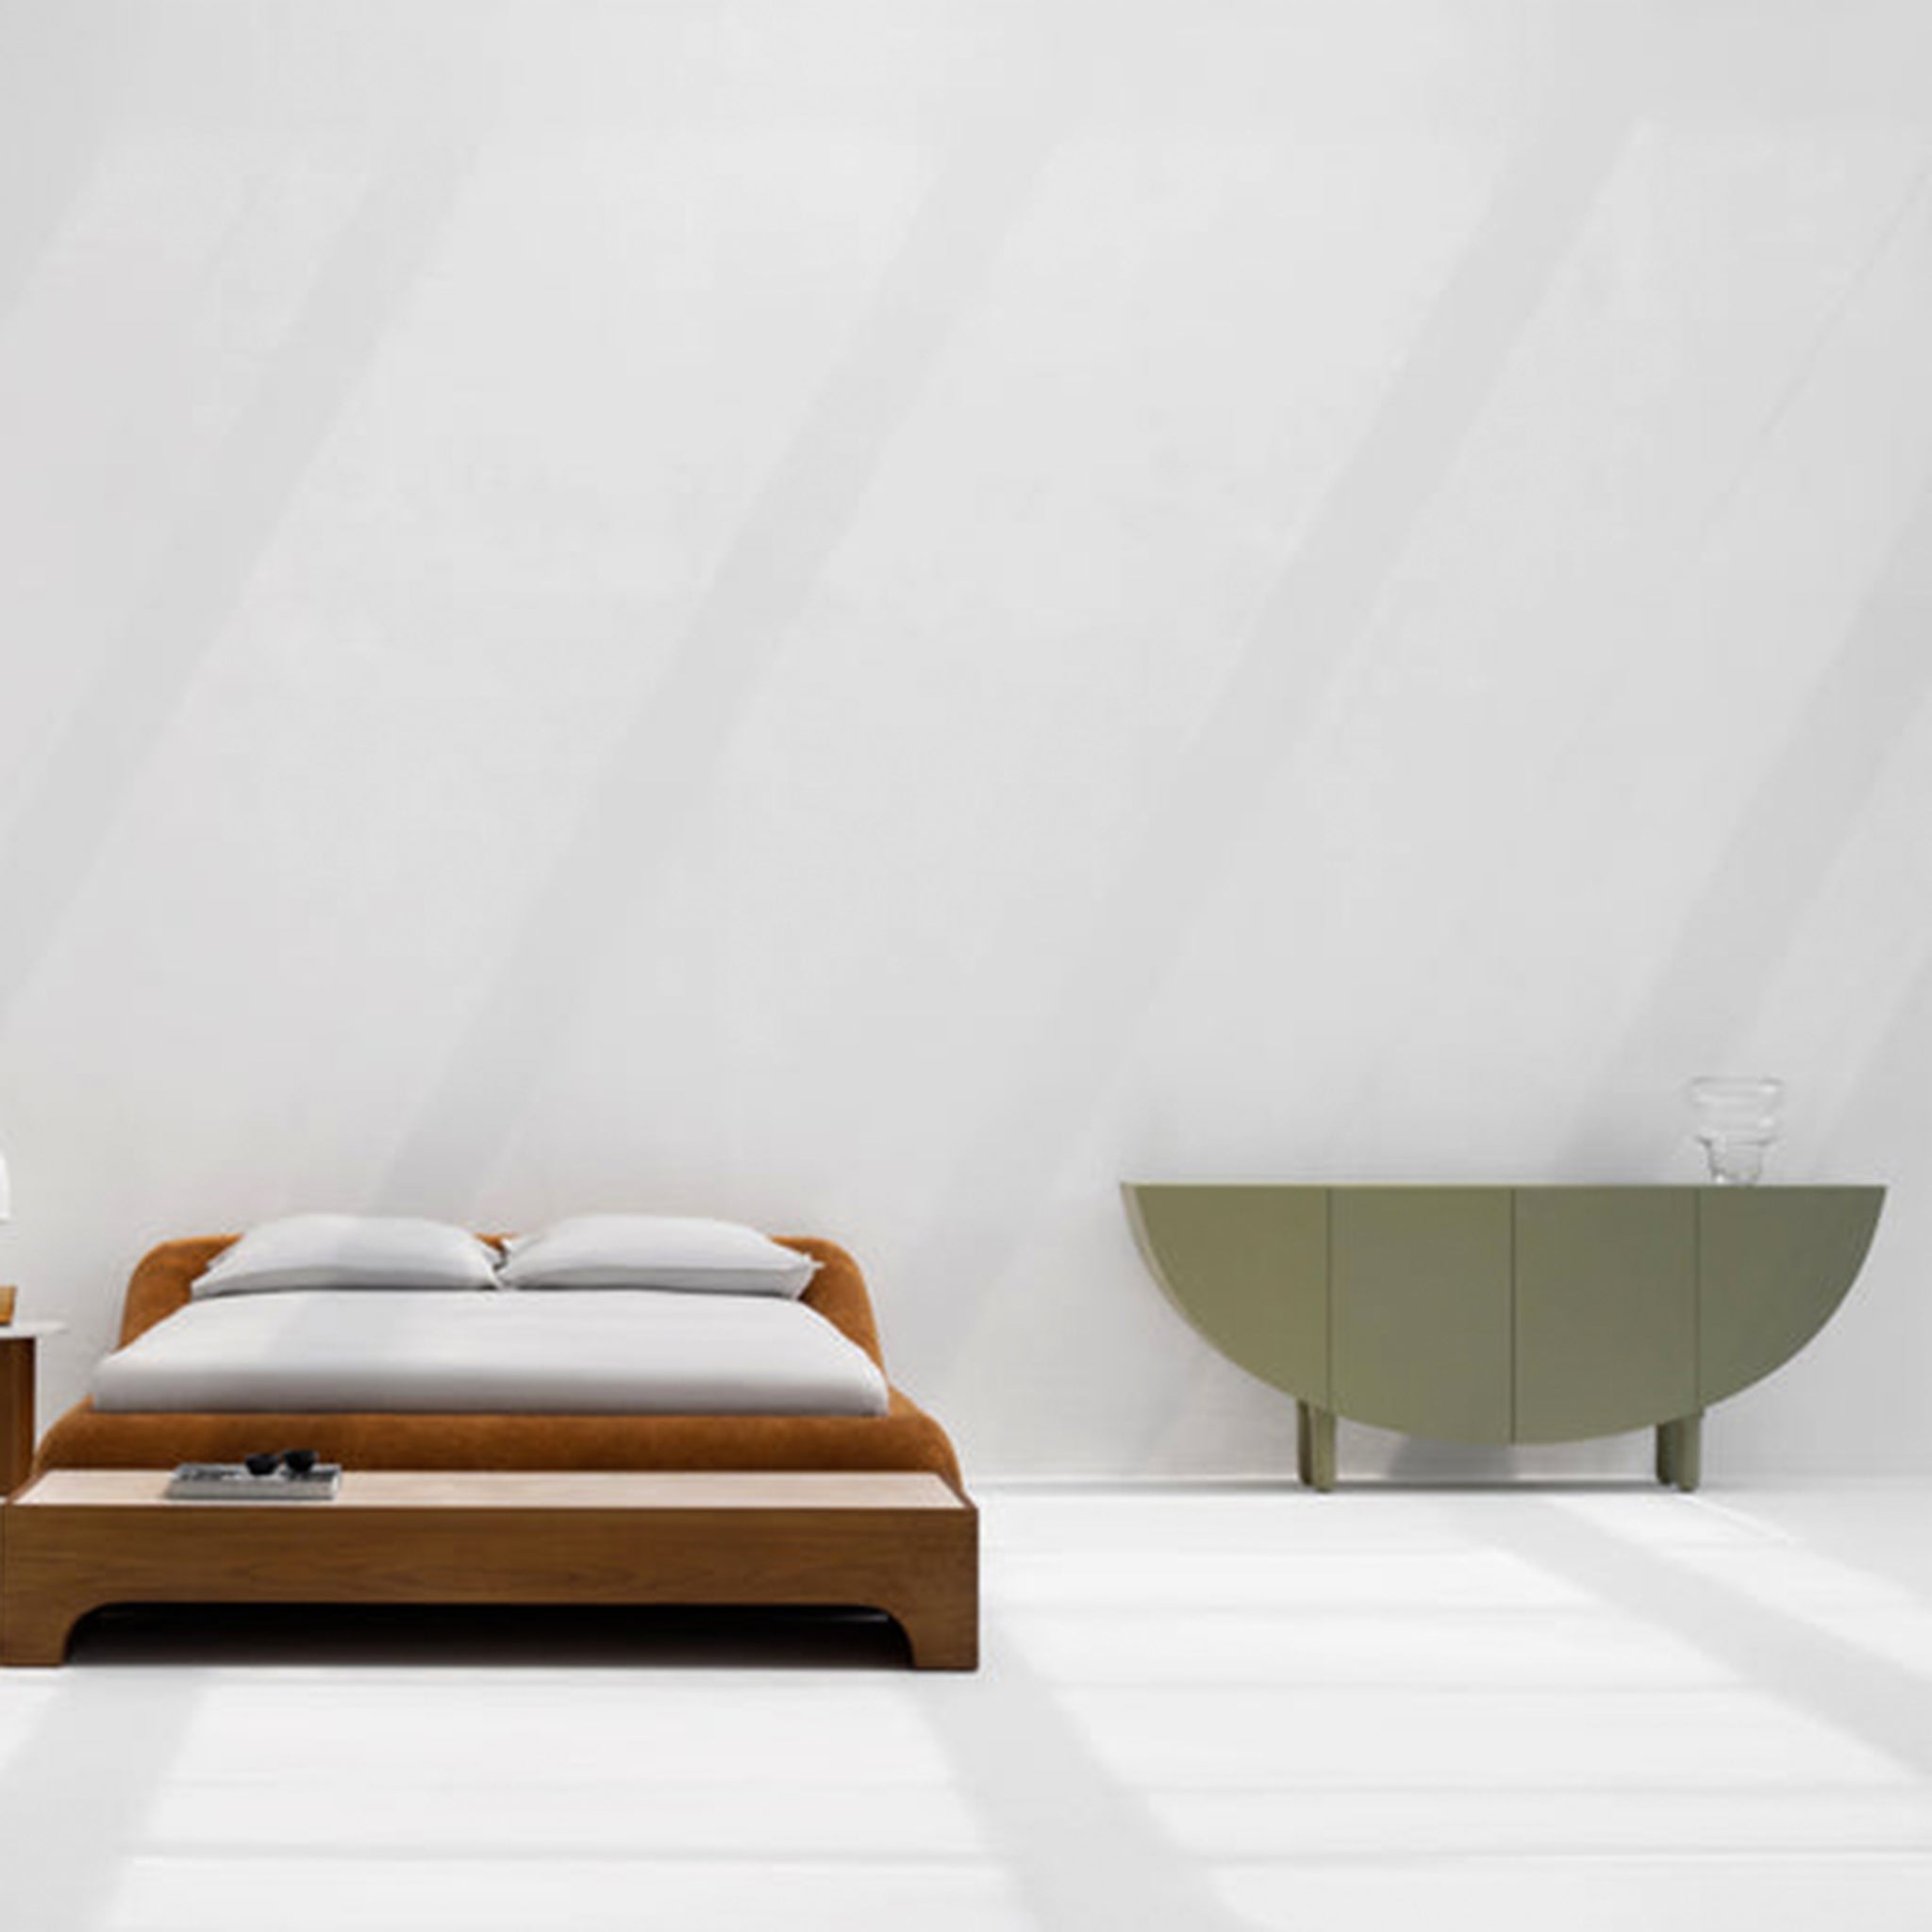 A minimalist bedroom featuring a wooden bed with white bedding, a small bedside table with a lamp, and an olive green half-moon sideboard against a light gray wall. The sideboard has a clear glass vase on top, creating a clean and modern look.